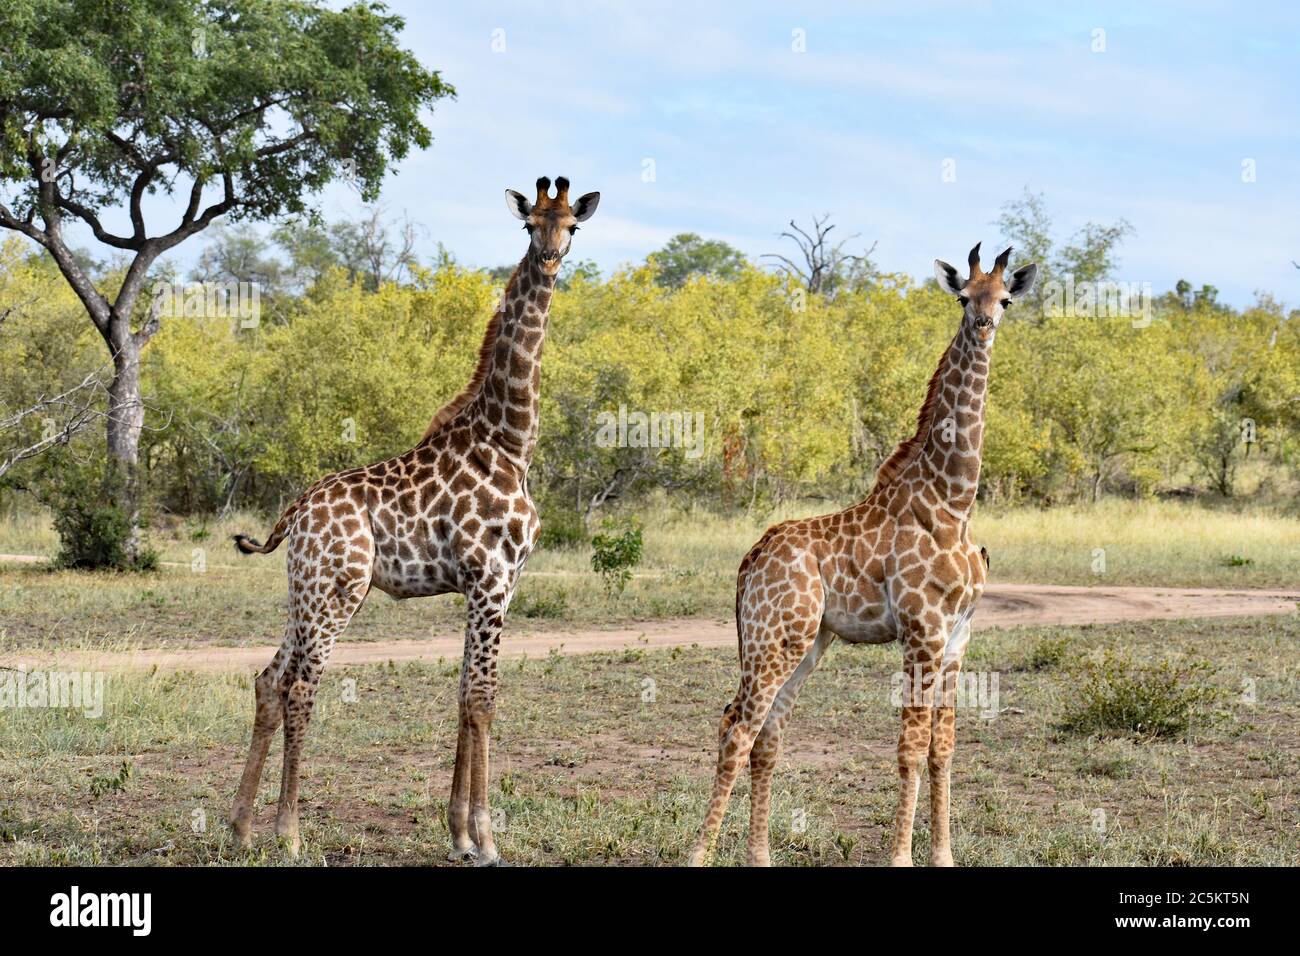 Two Giraffes (Giraffa) paused while walking and looking into the camera while on a game drive in Sabi Sands Game Reserve, Greater Kruger, South Africa. Stock Photo